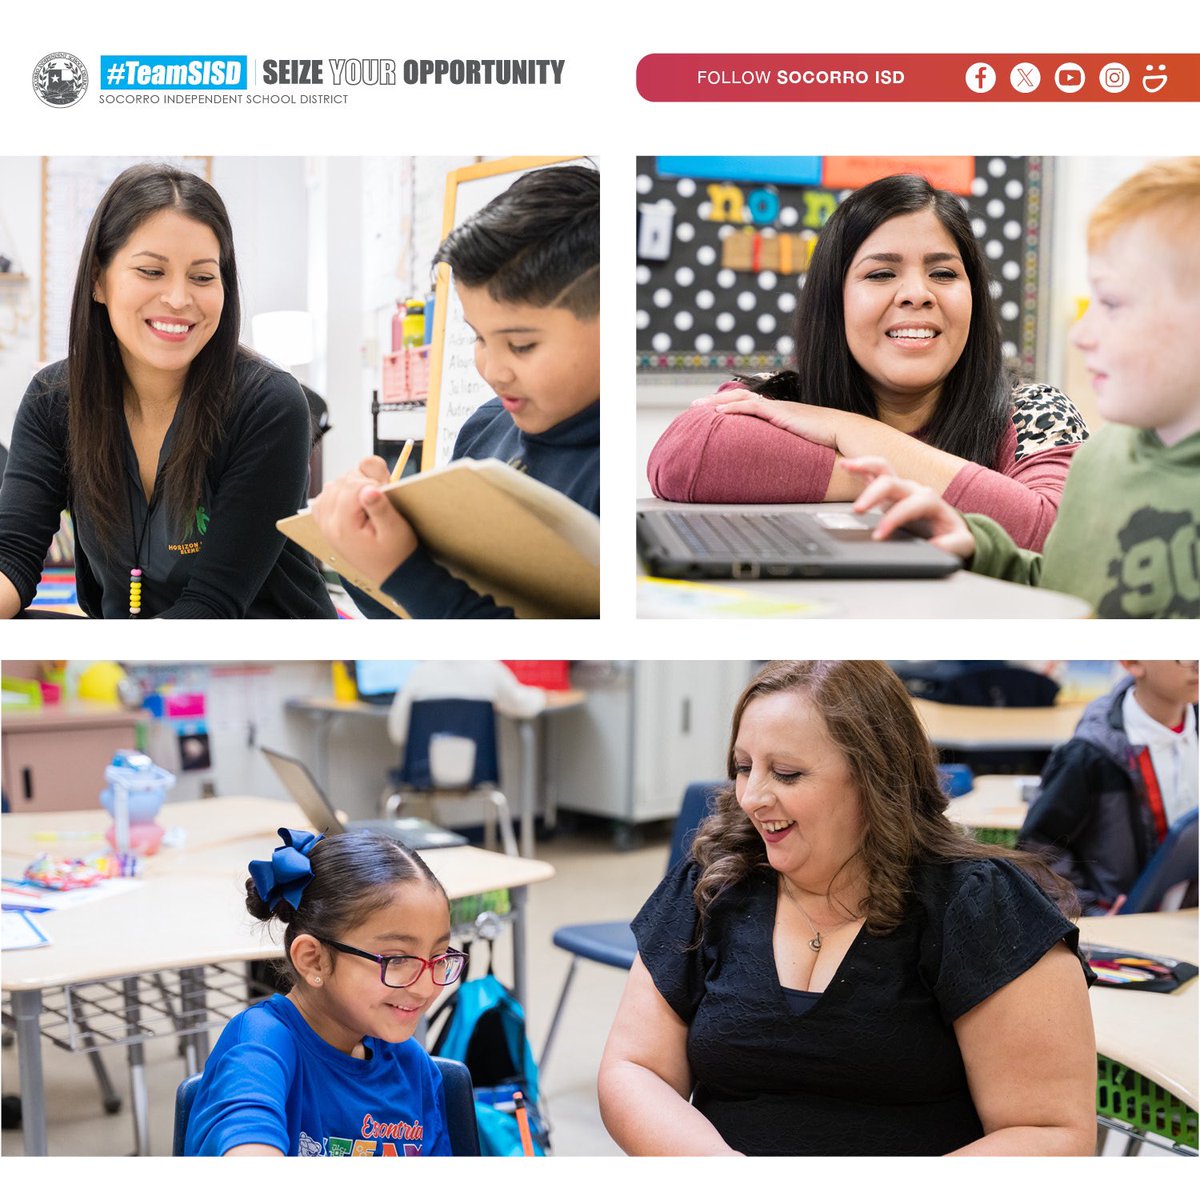 #TeamSISD teachers excel in both sharing knowledge and expanding their own, continuously progressing in their careers. They tackle obstacles with skill and passion, devoted to nurturing a positive impact on their students' paths. We appreciate all you do!